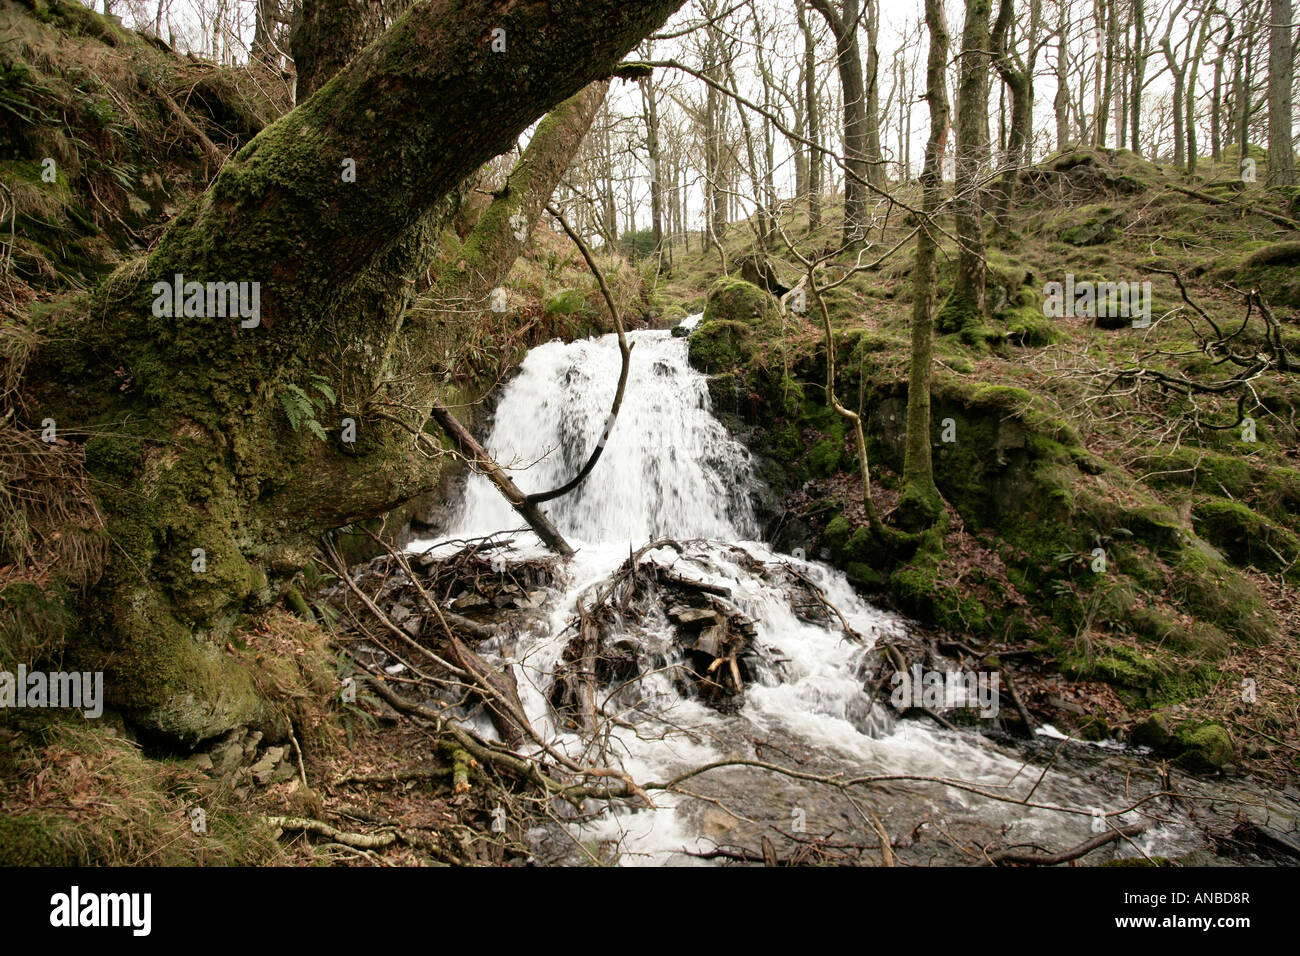 River with small waterfall in a forest in north Wales Stock Photo